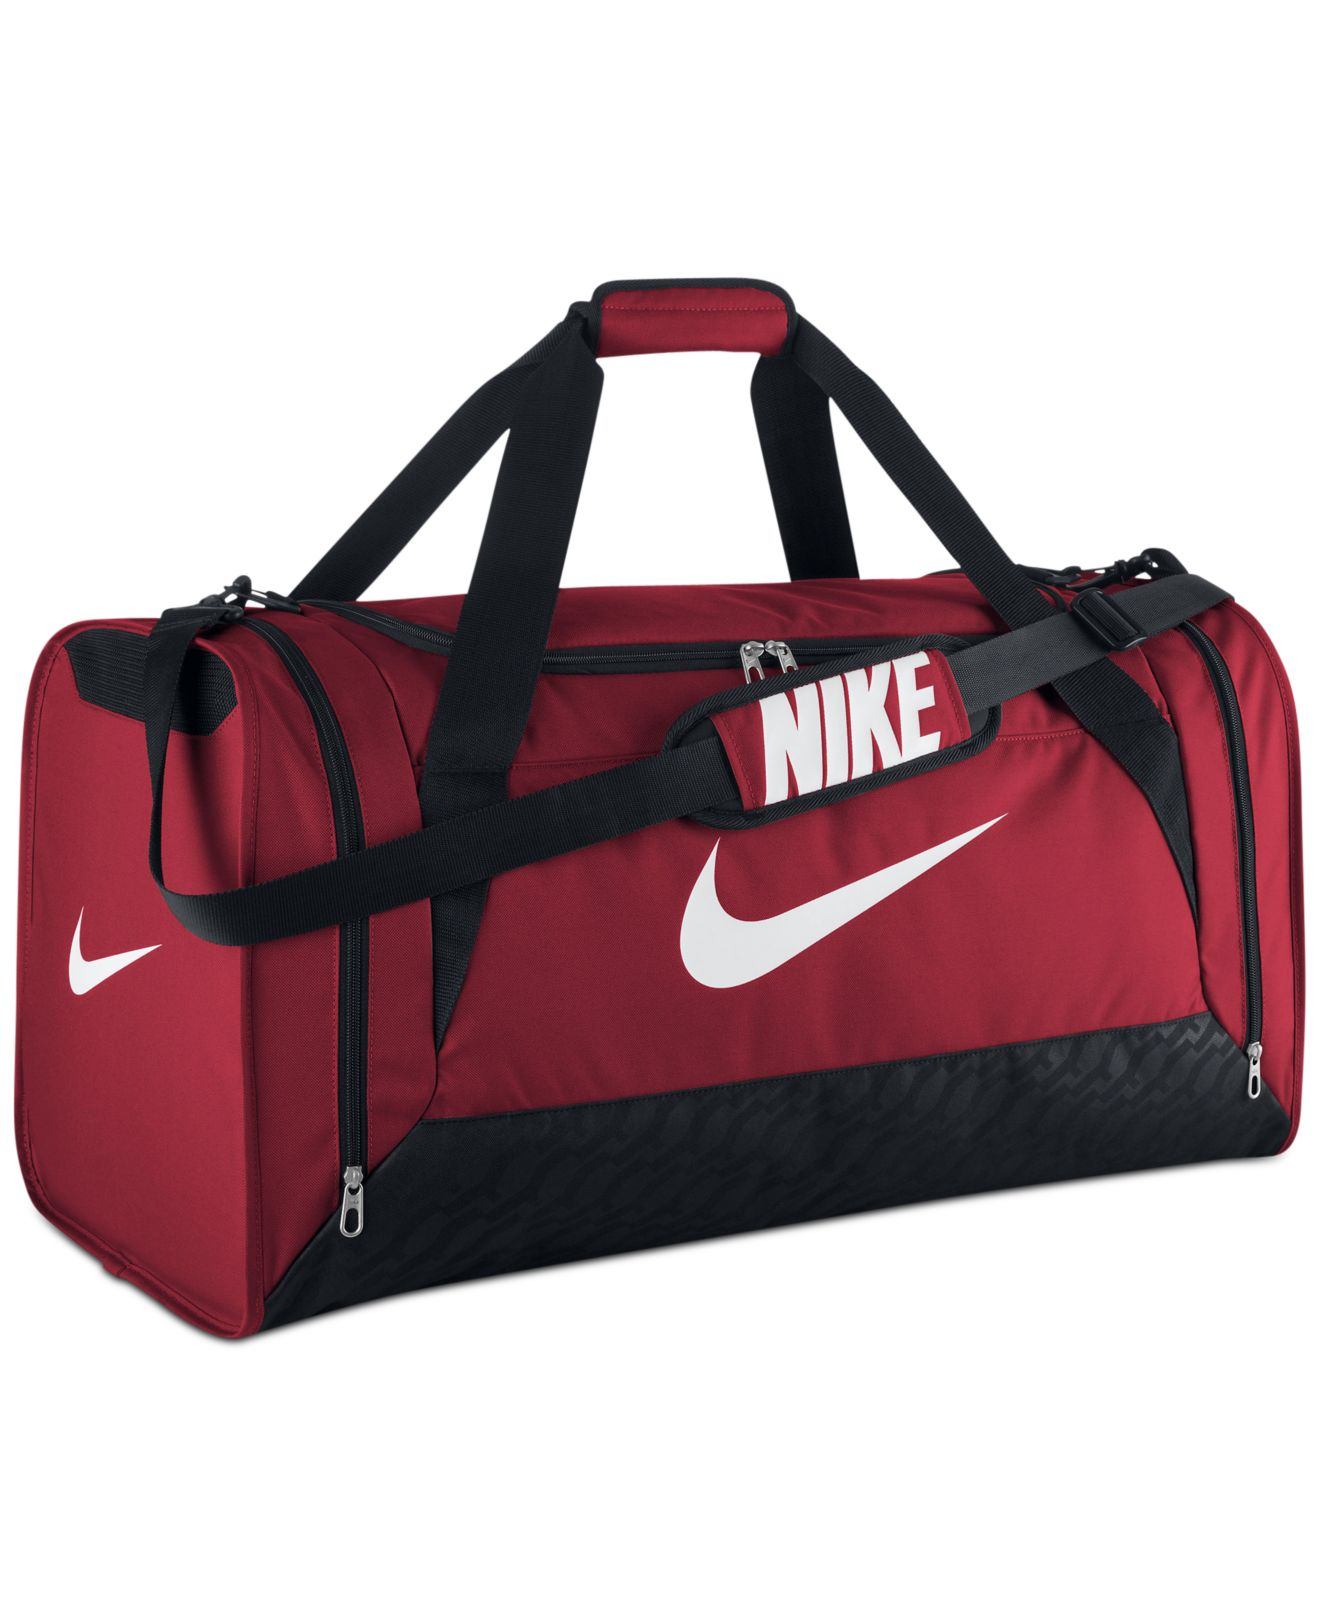 Isolieren Fang Code nike small duffle bag dimensions Alter Morphium Palast